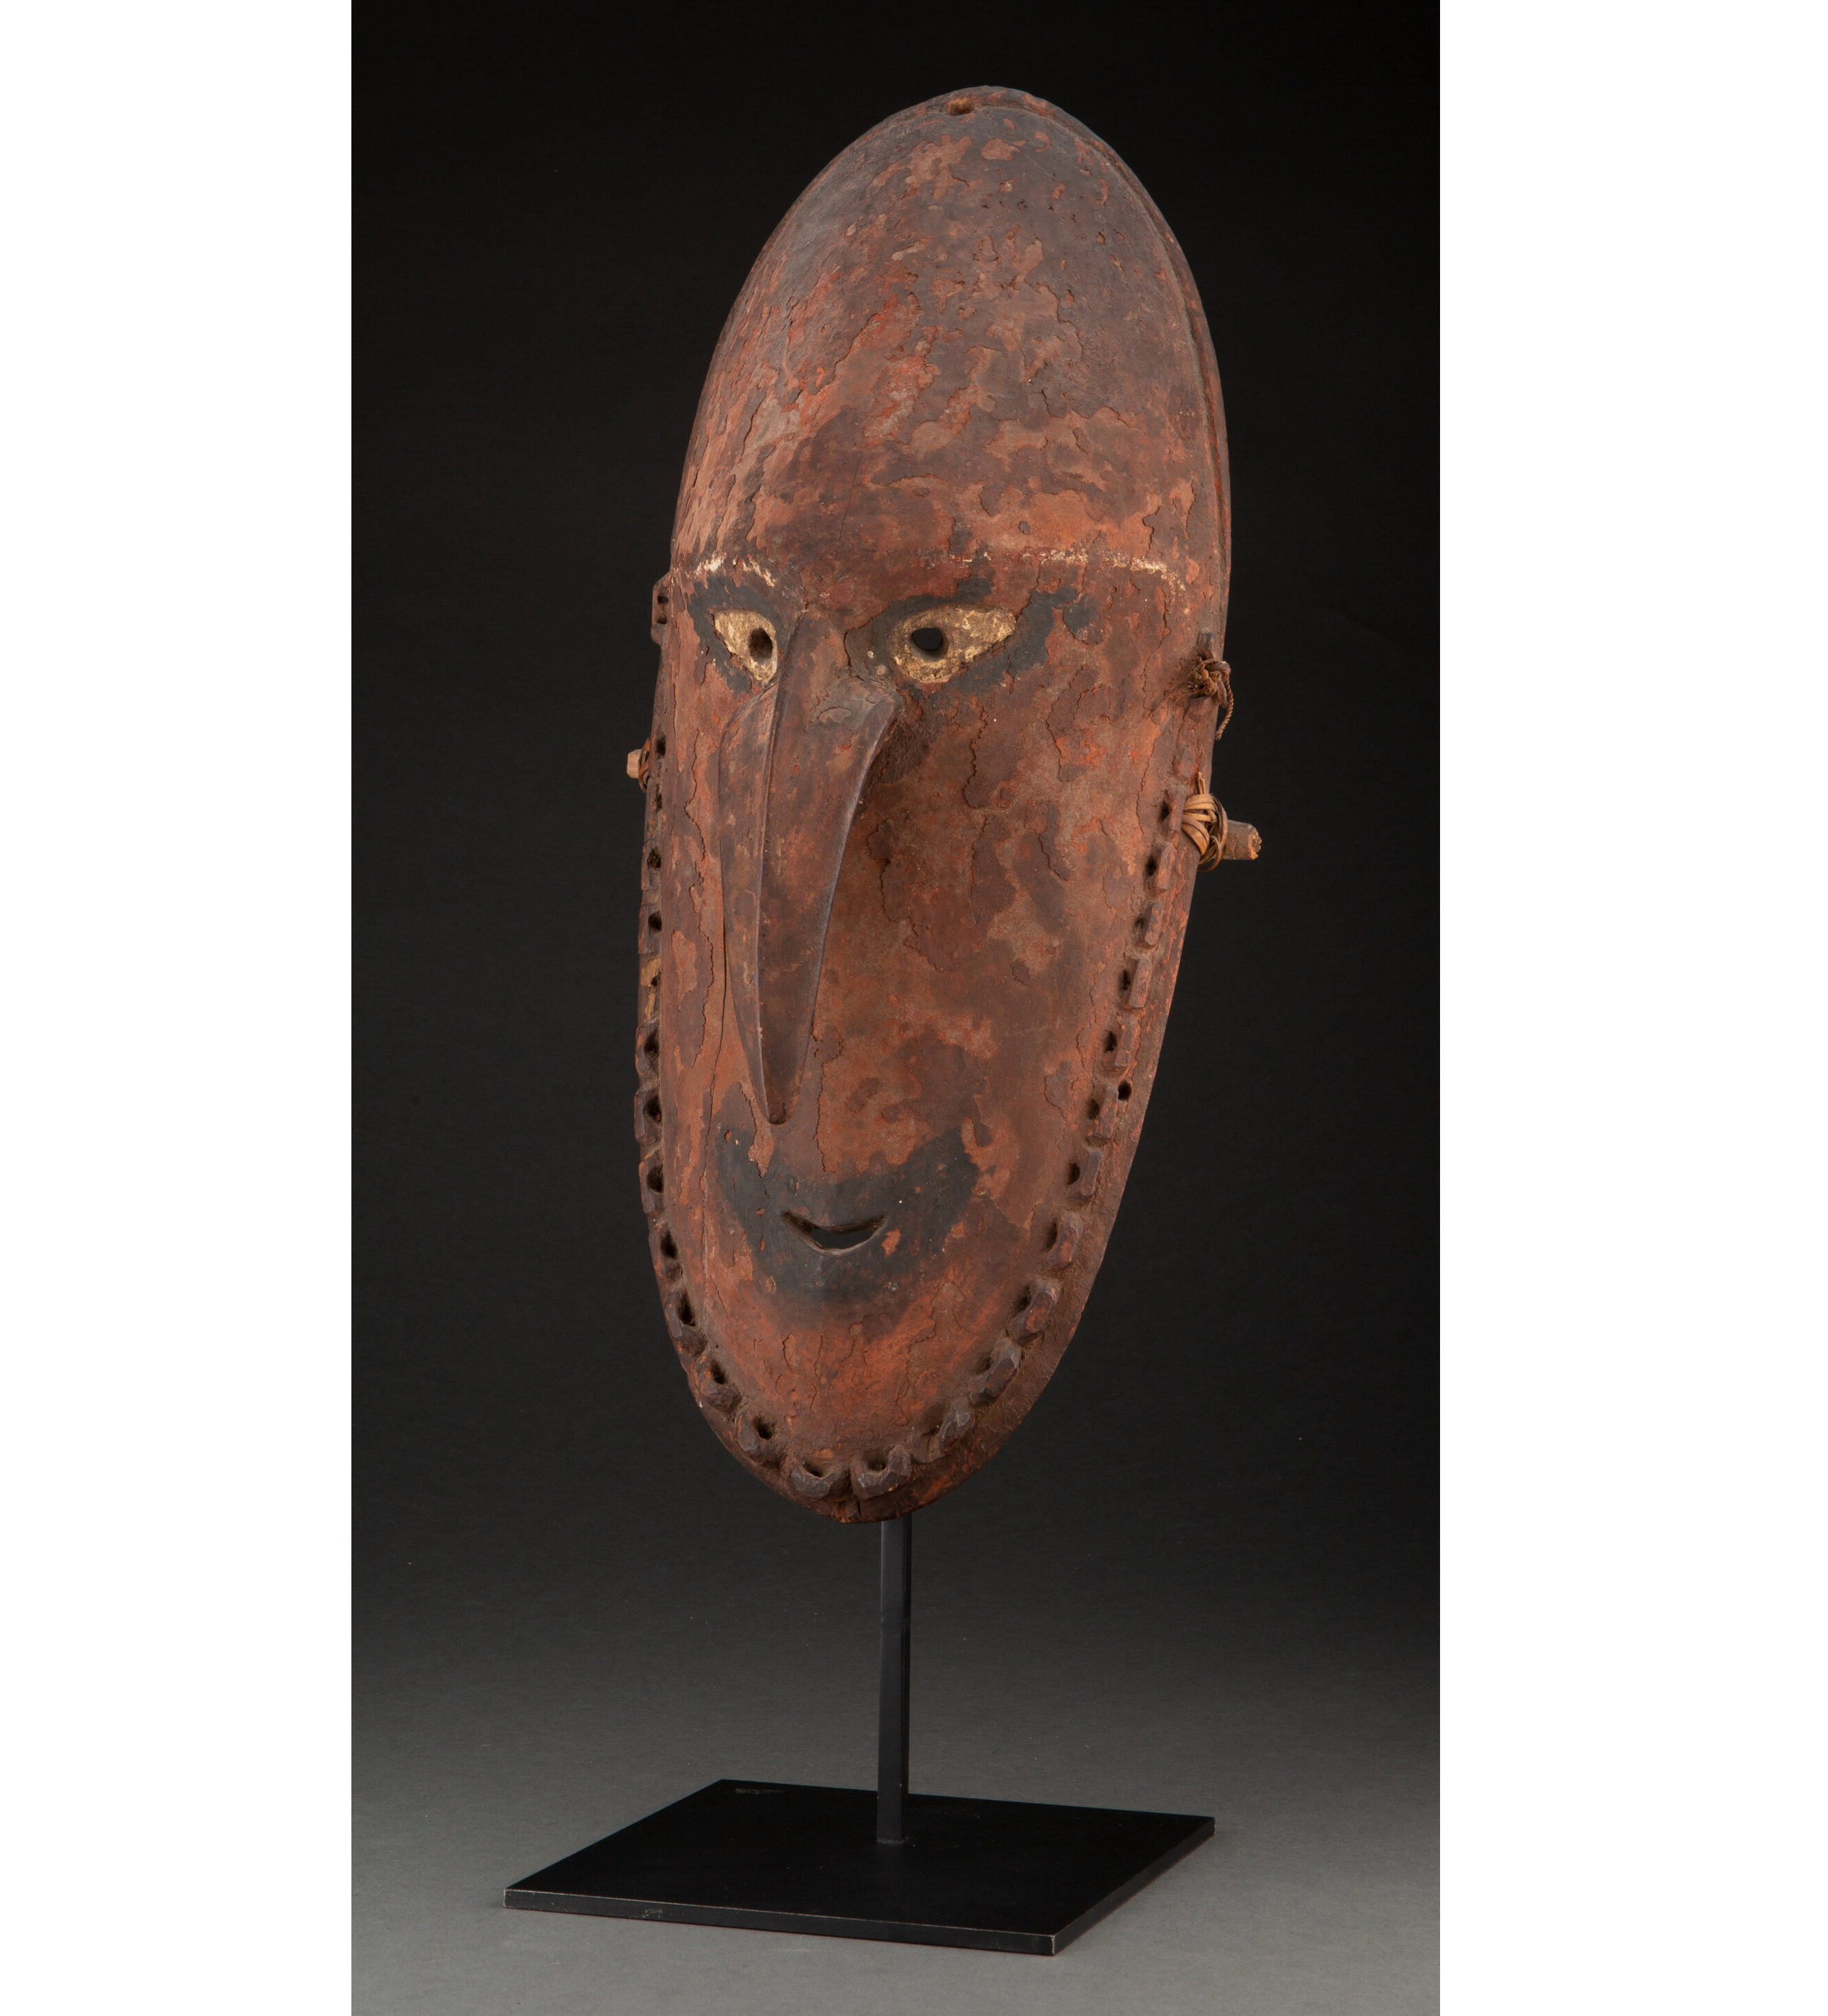 Murik mask from Papua New Guinea, est. $60,000-$80,000. Image courtesy of Heritage Auctions